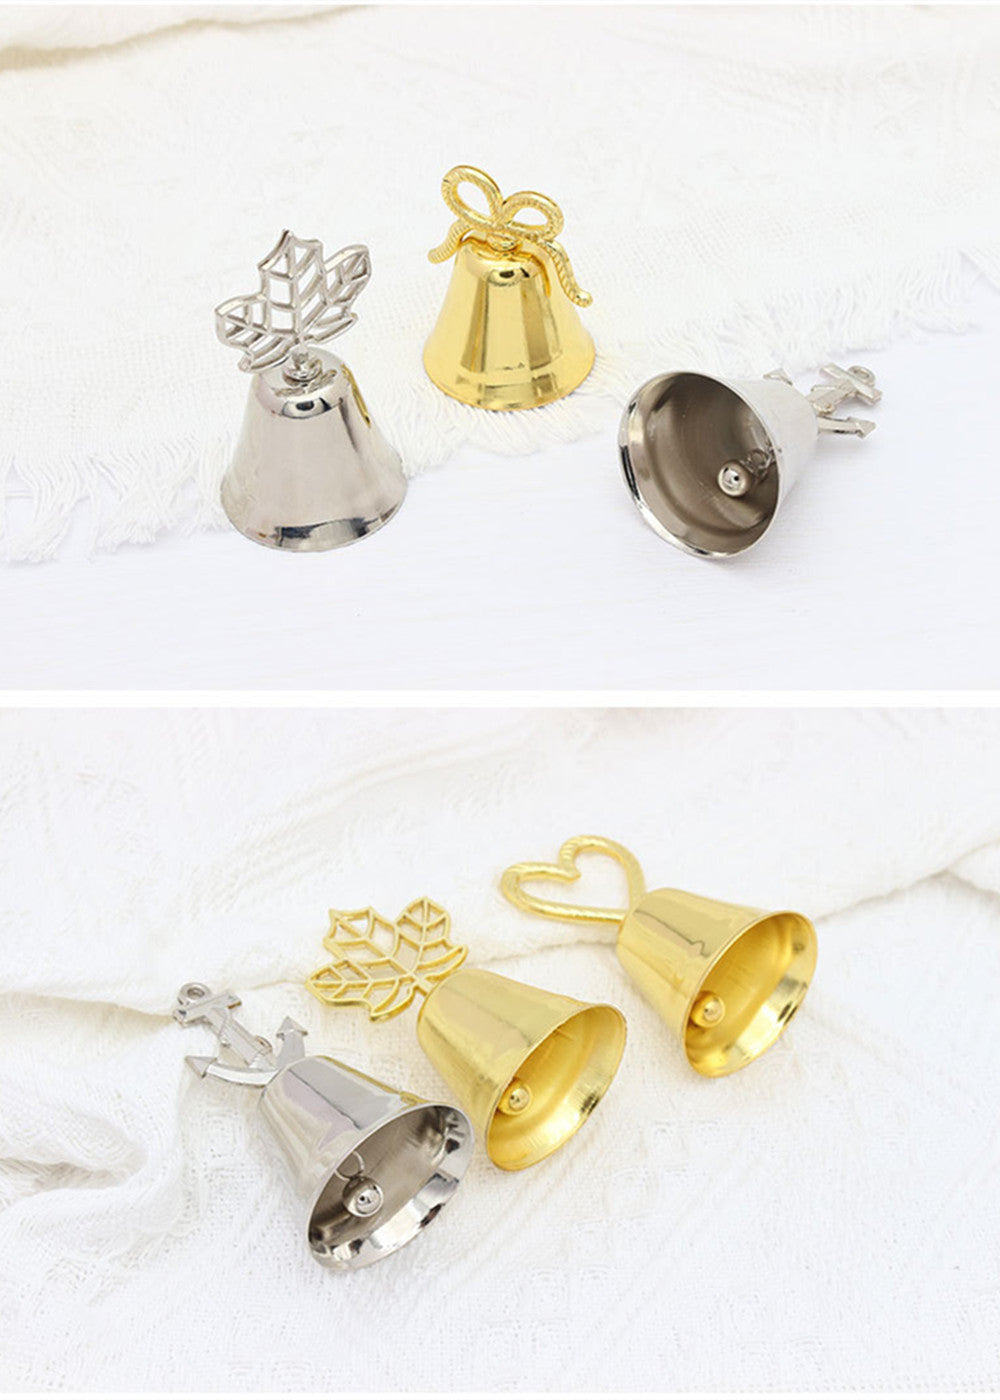 Cute Gold and Silver Bell Place Cards Holder (SET OF 5)